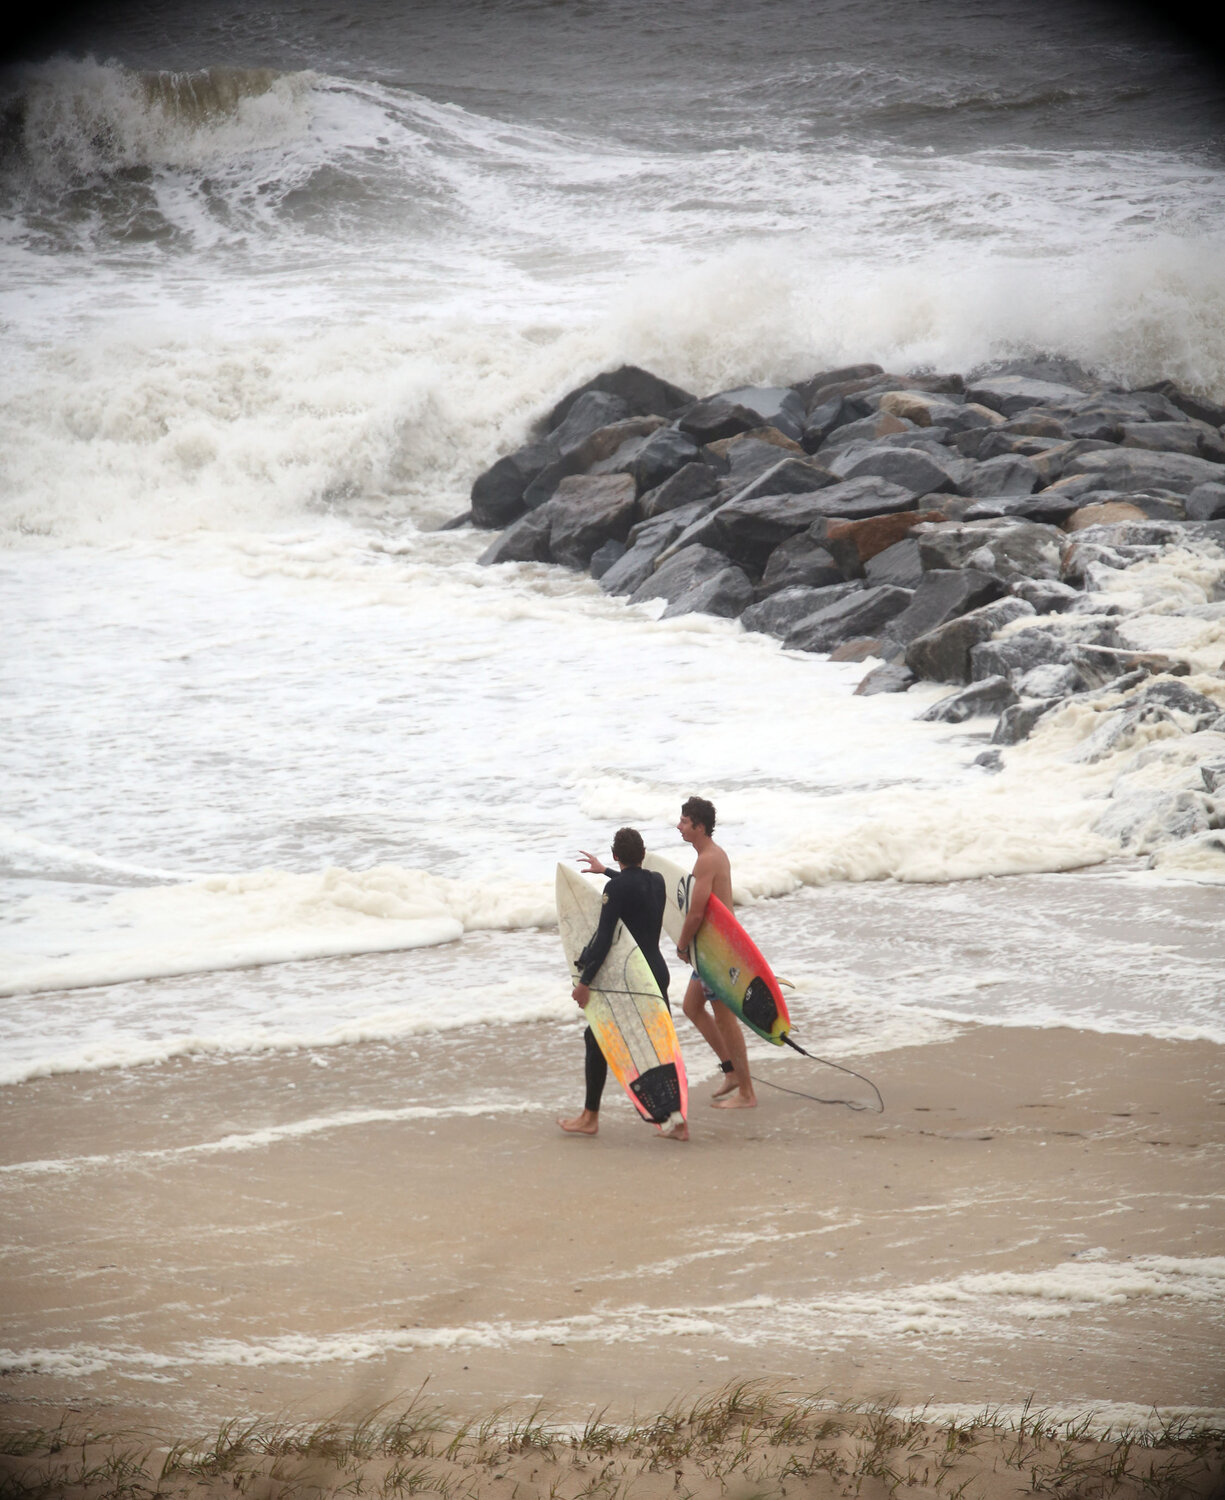 The surf was up Saturday afternoon at Herring Point in the Cape Henlopen State Park.